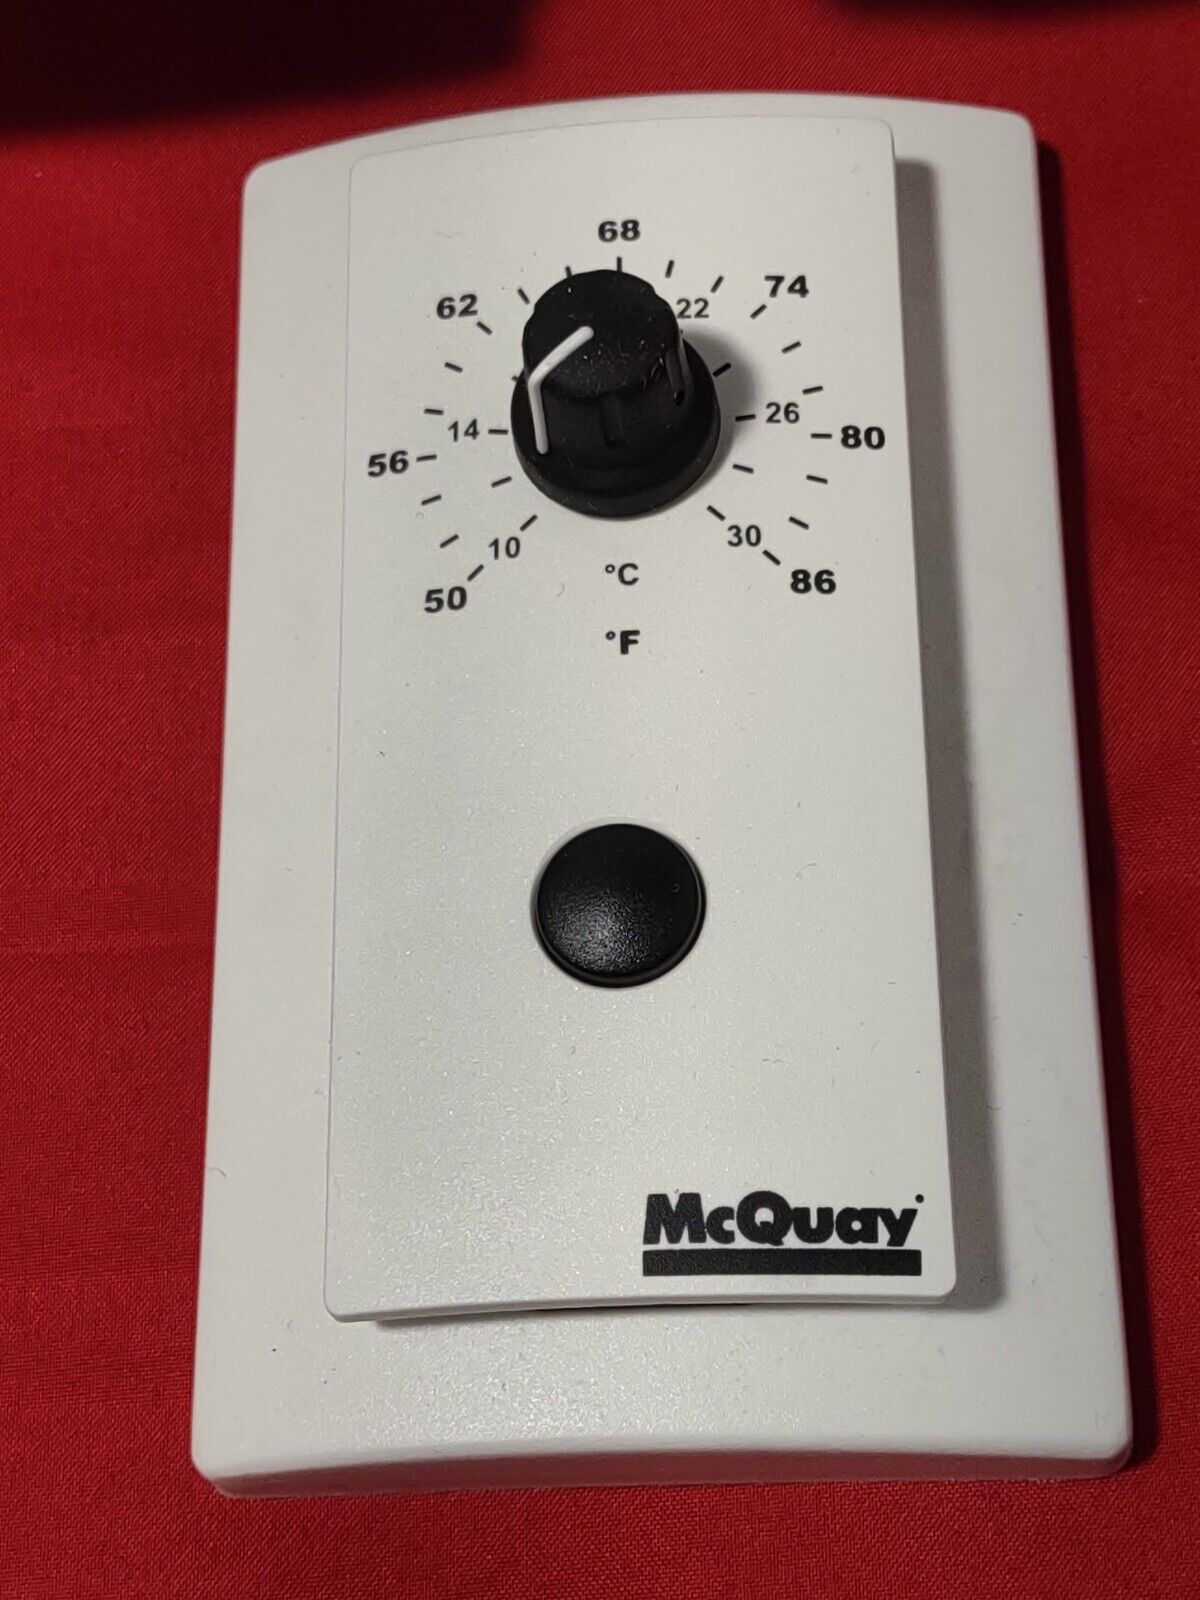 MCQUAY 113117801 MPS ROOFTOP UNIT CONTROLLER REMOTE MOUNTED SENSOR SPACE WALL US